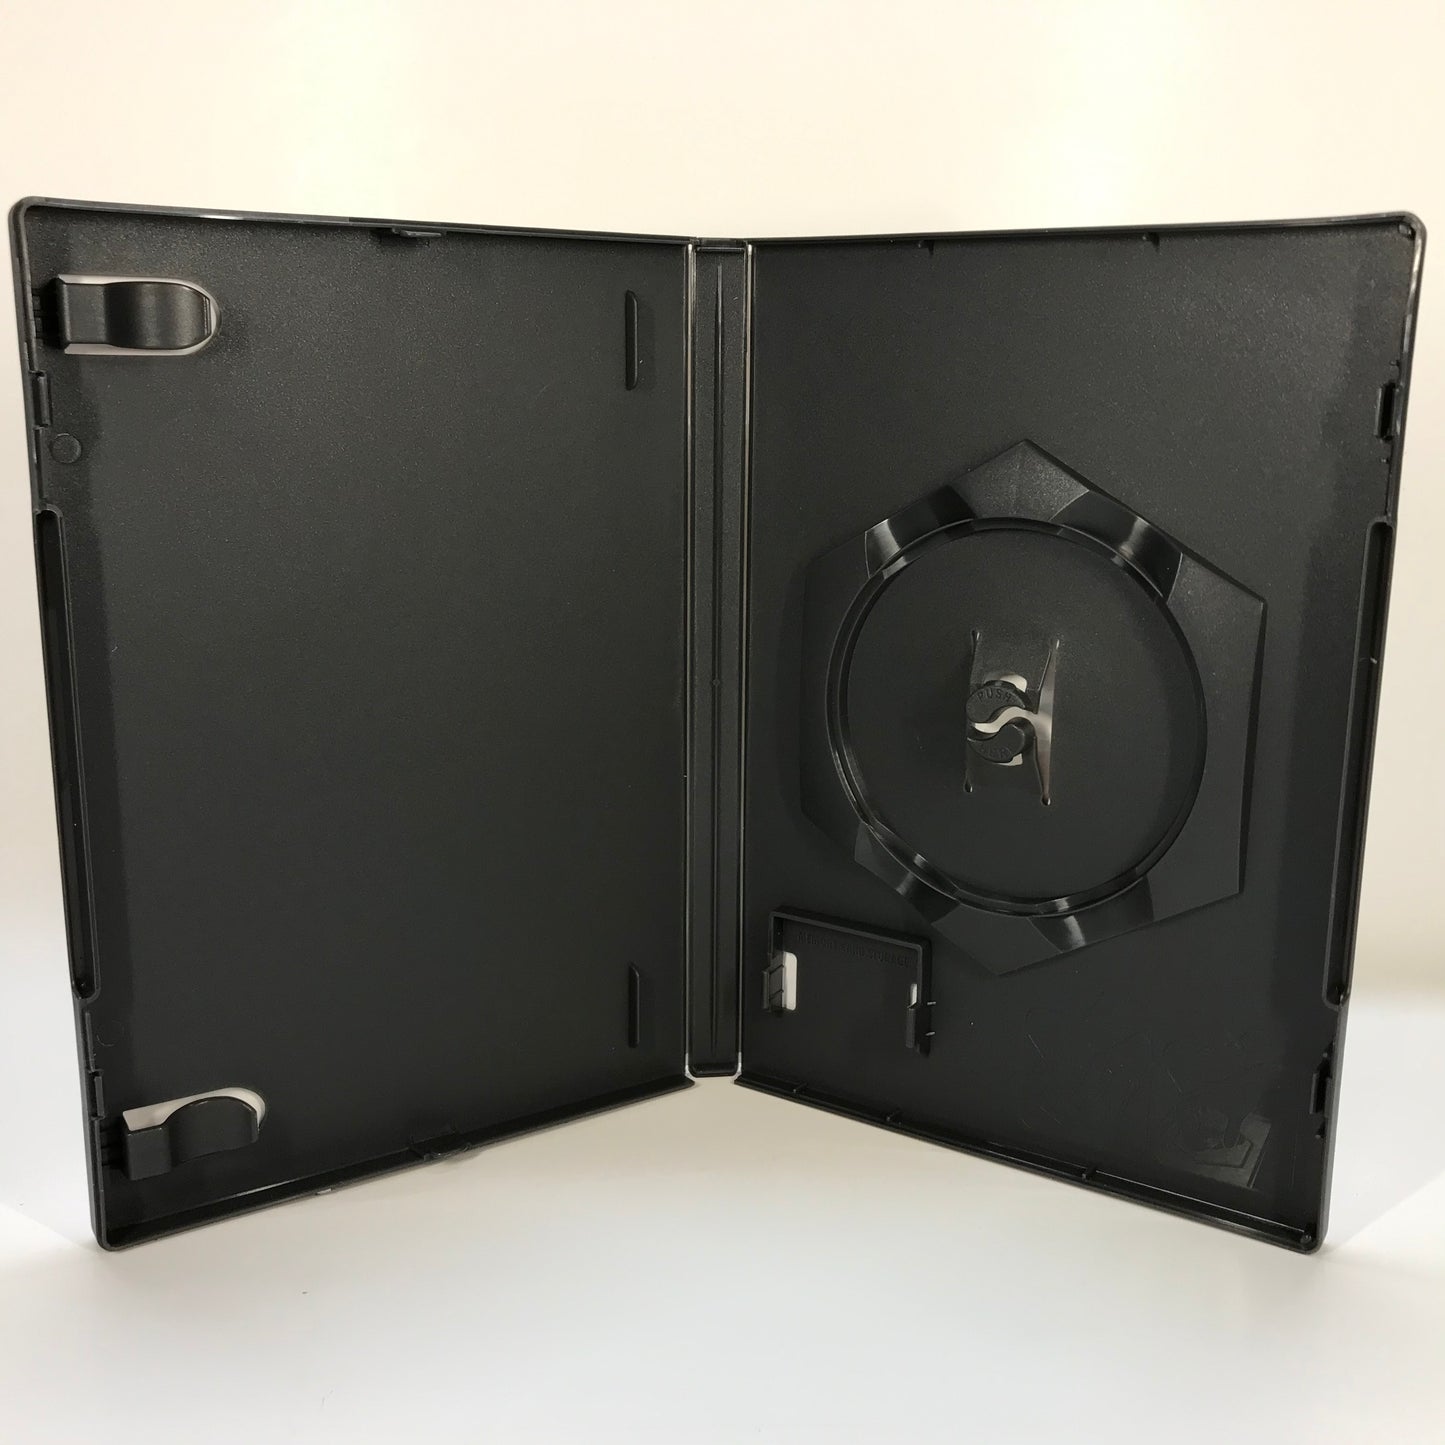 GameCube Replacement Case - NO GAME - Disney's Hide and Seek